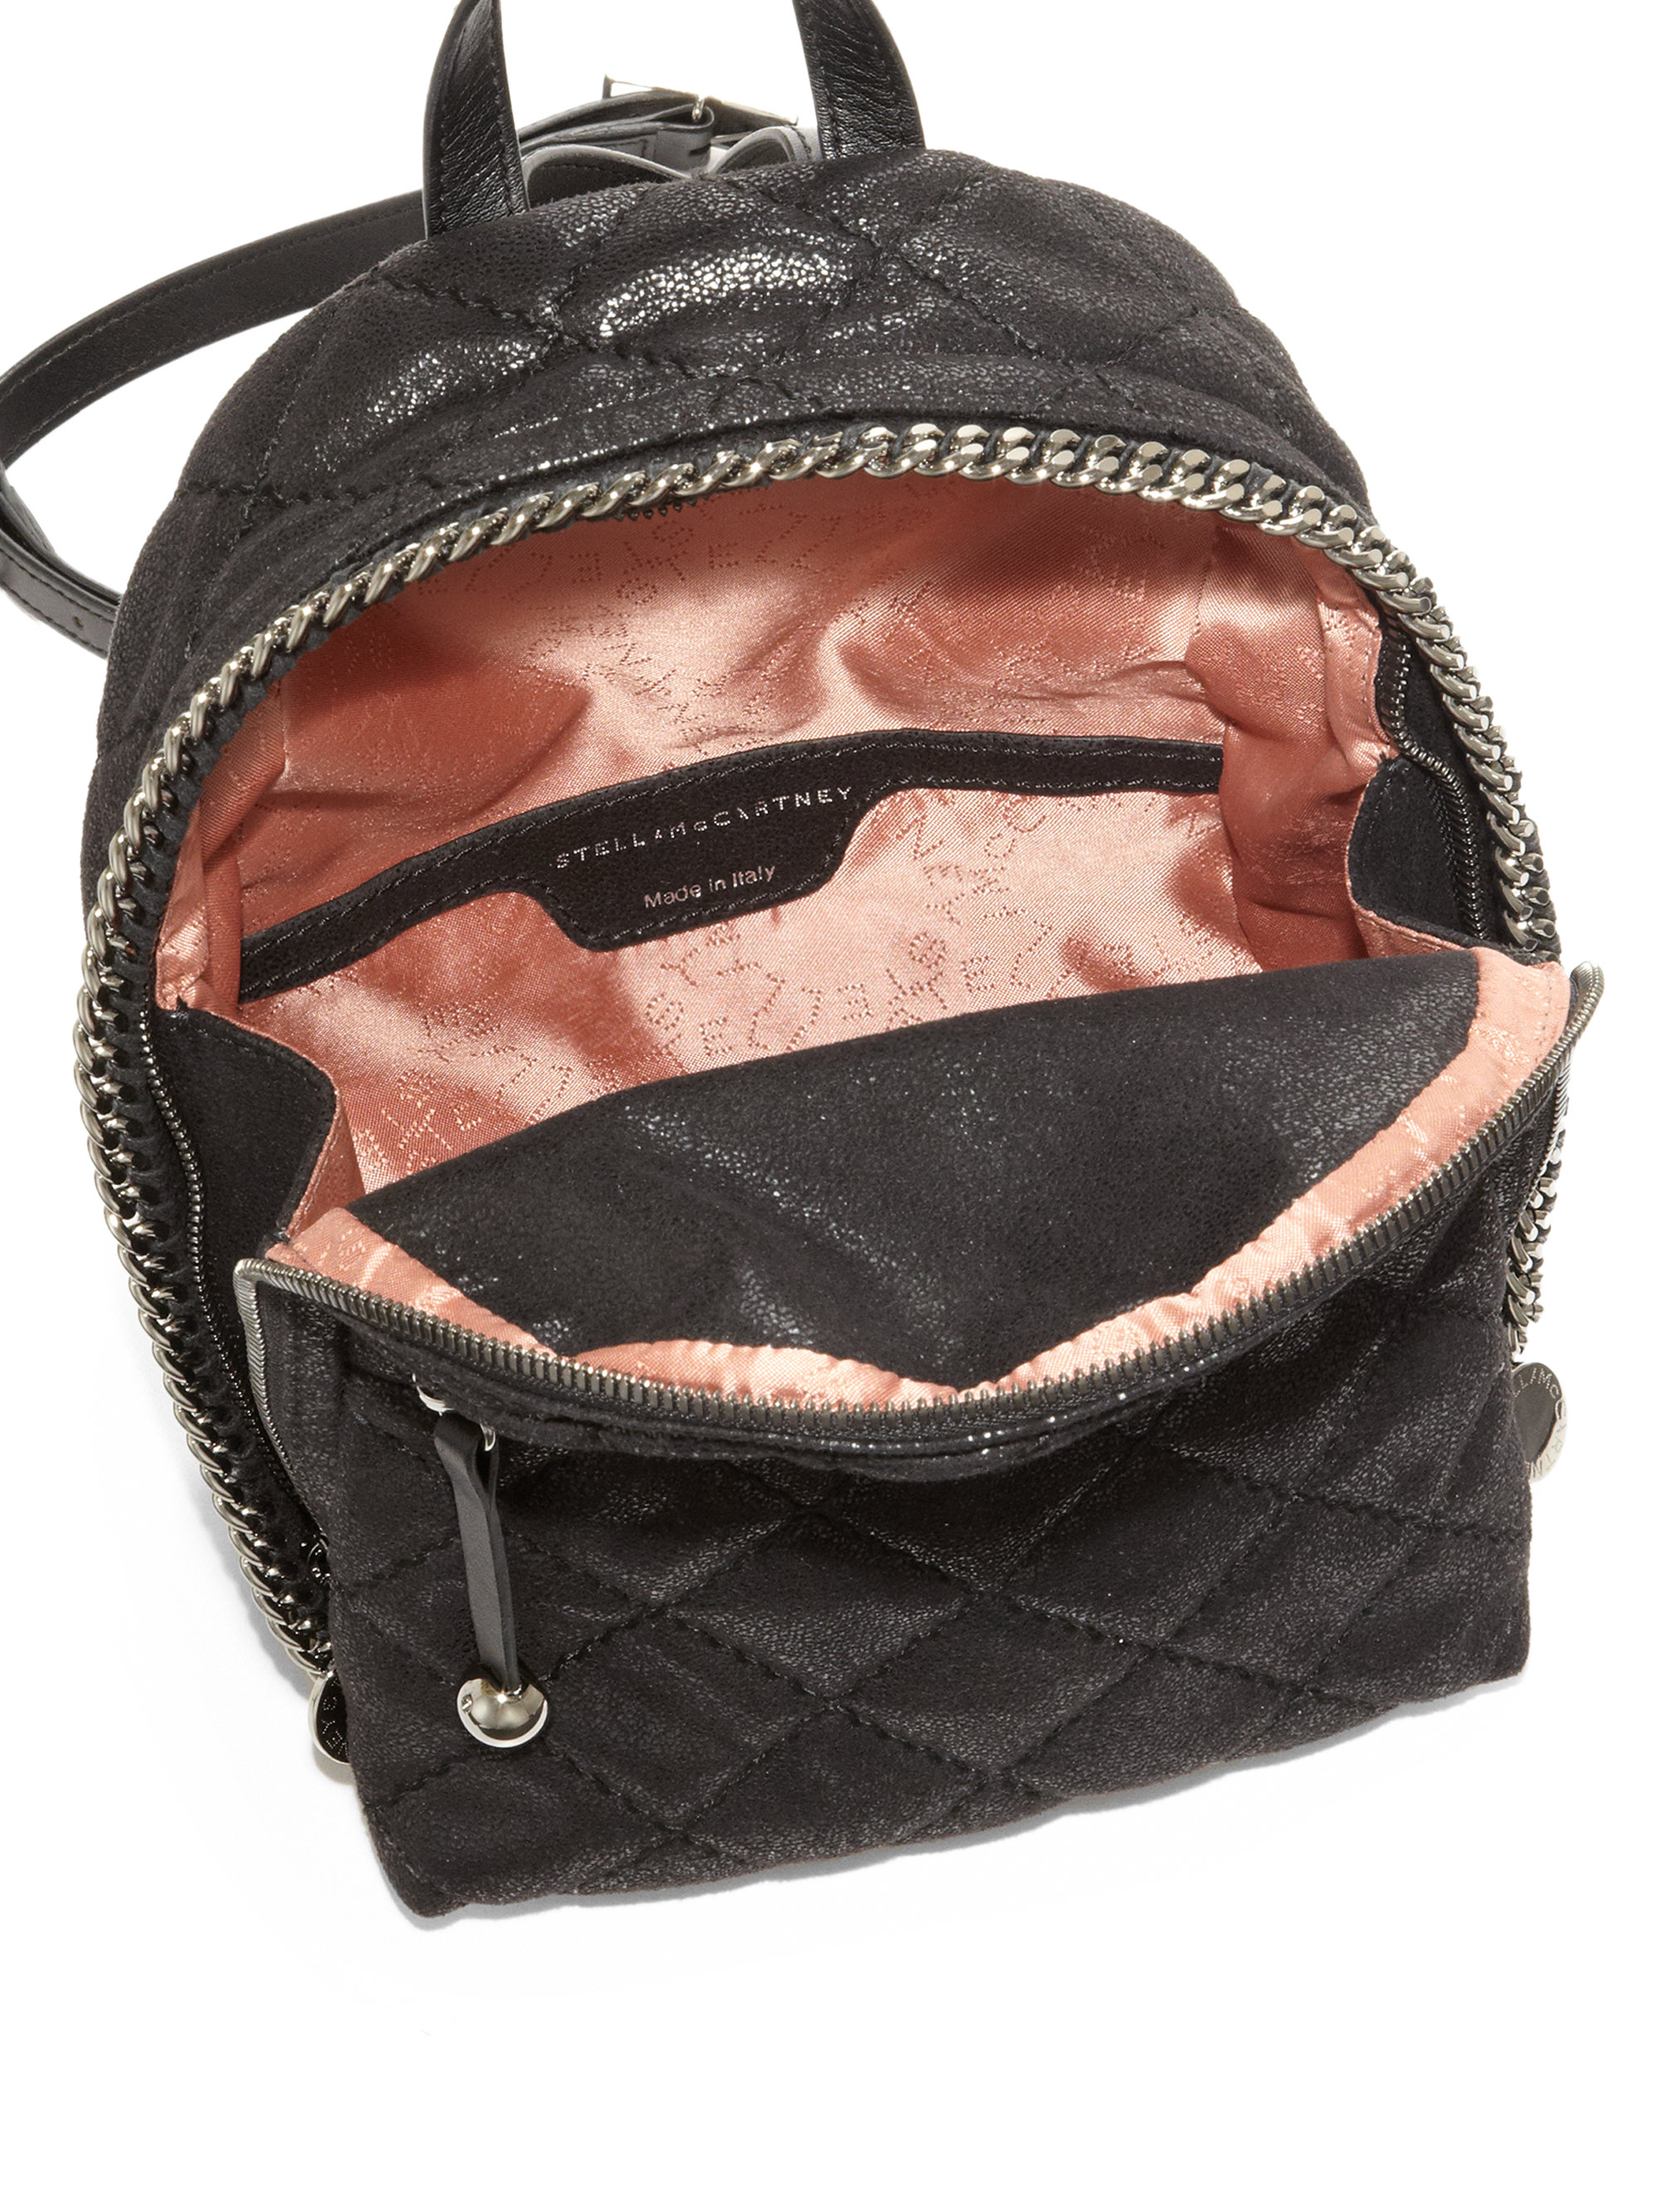 Stella mccartney Quilted Faux-leather Mini Backpack in Black | Lyst